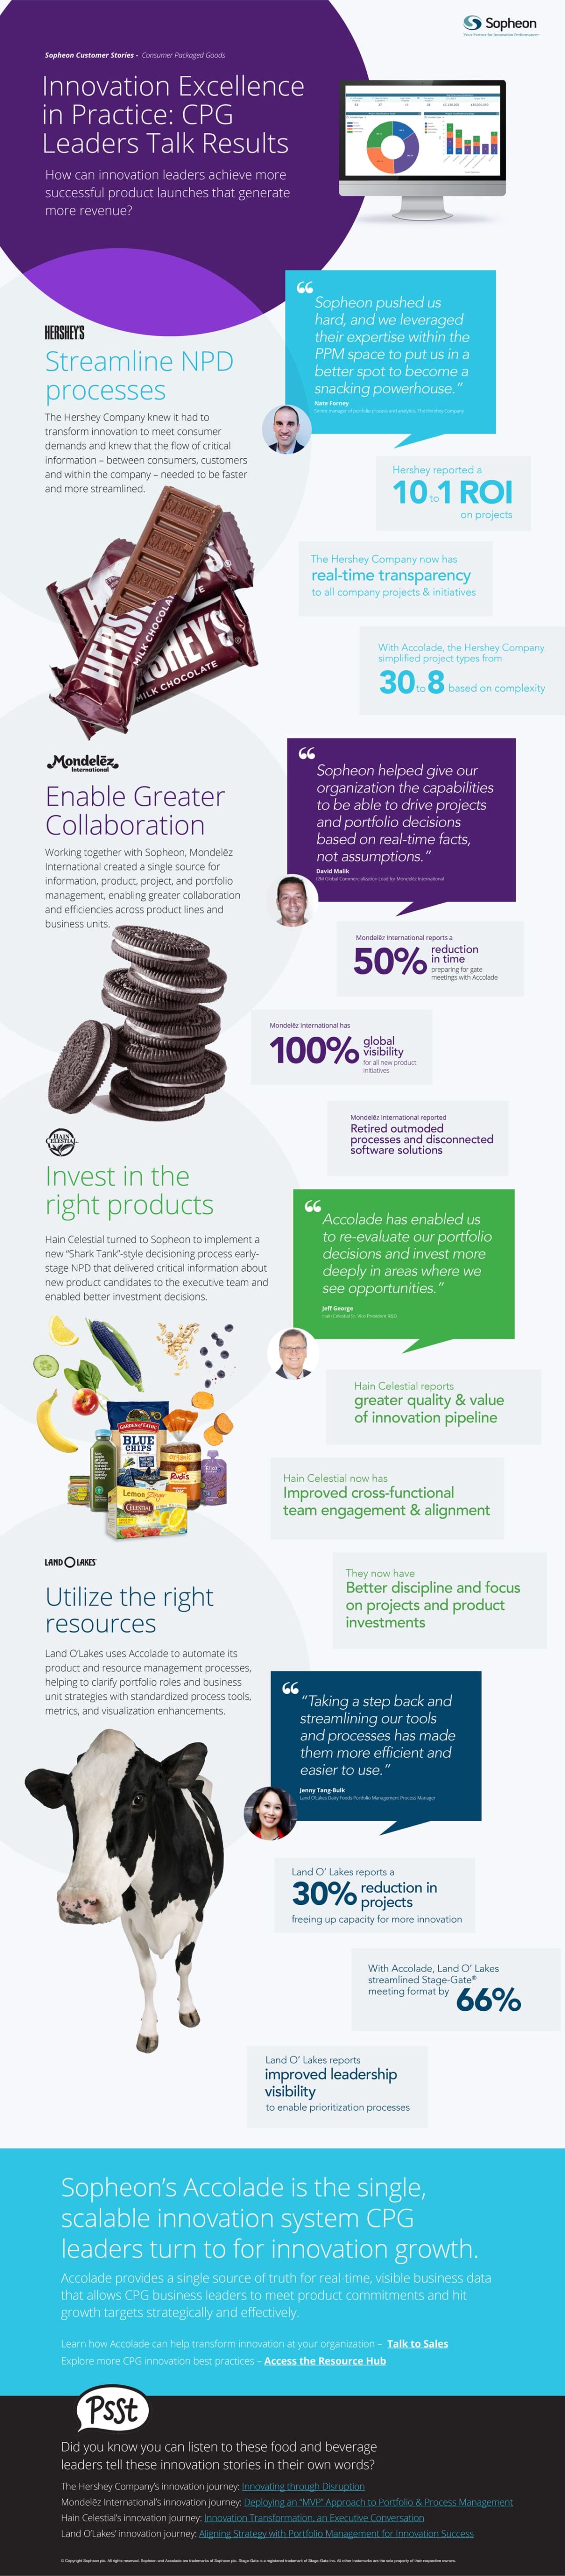 CPG-Customer-Stories-Infographic-1280-1200x5469-1